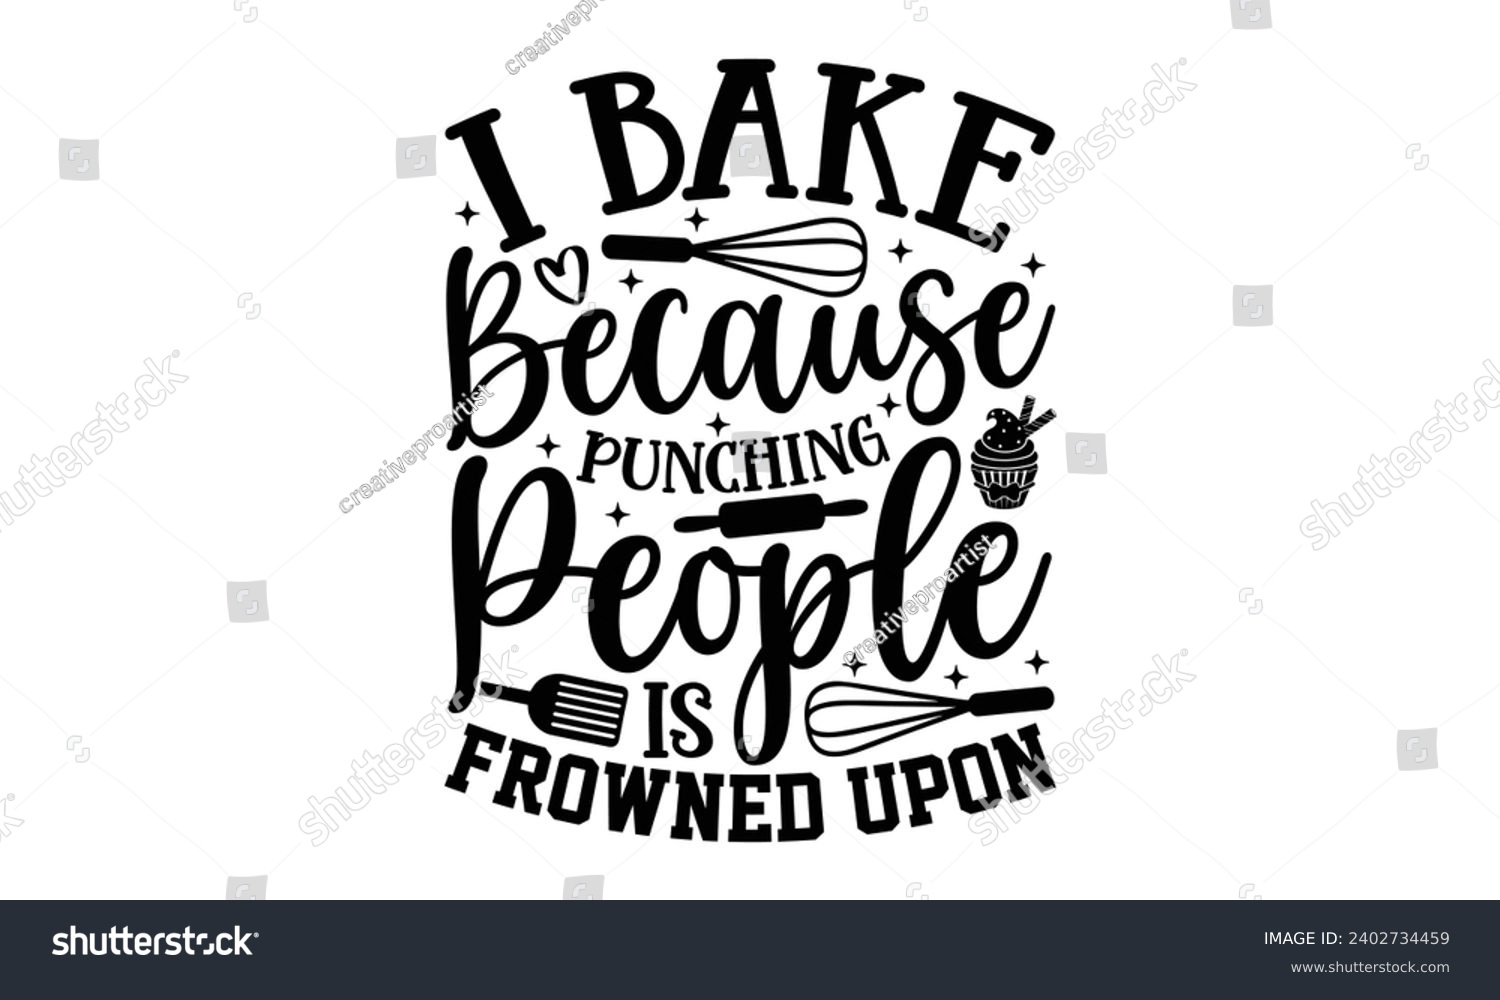 SVG of I Bake Because Punching People Is Frowned Upon- Baking t- shirt design, This illustration can be used as a print on Template bags, stationary or as a poster, Isolated on white background. svg